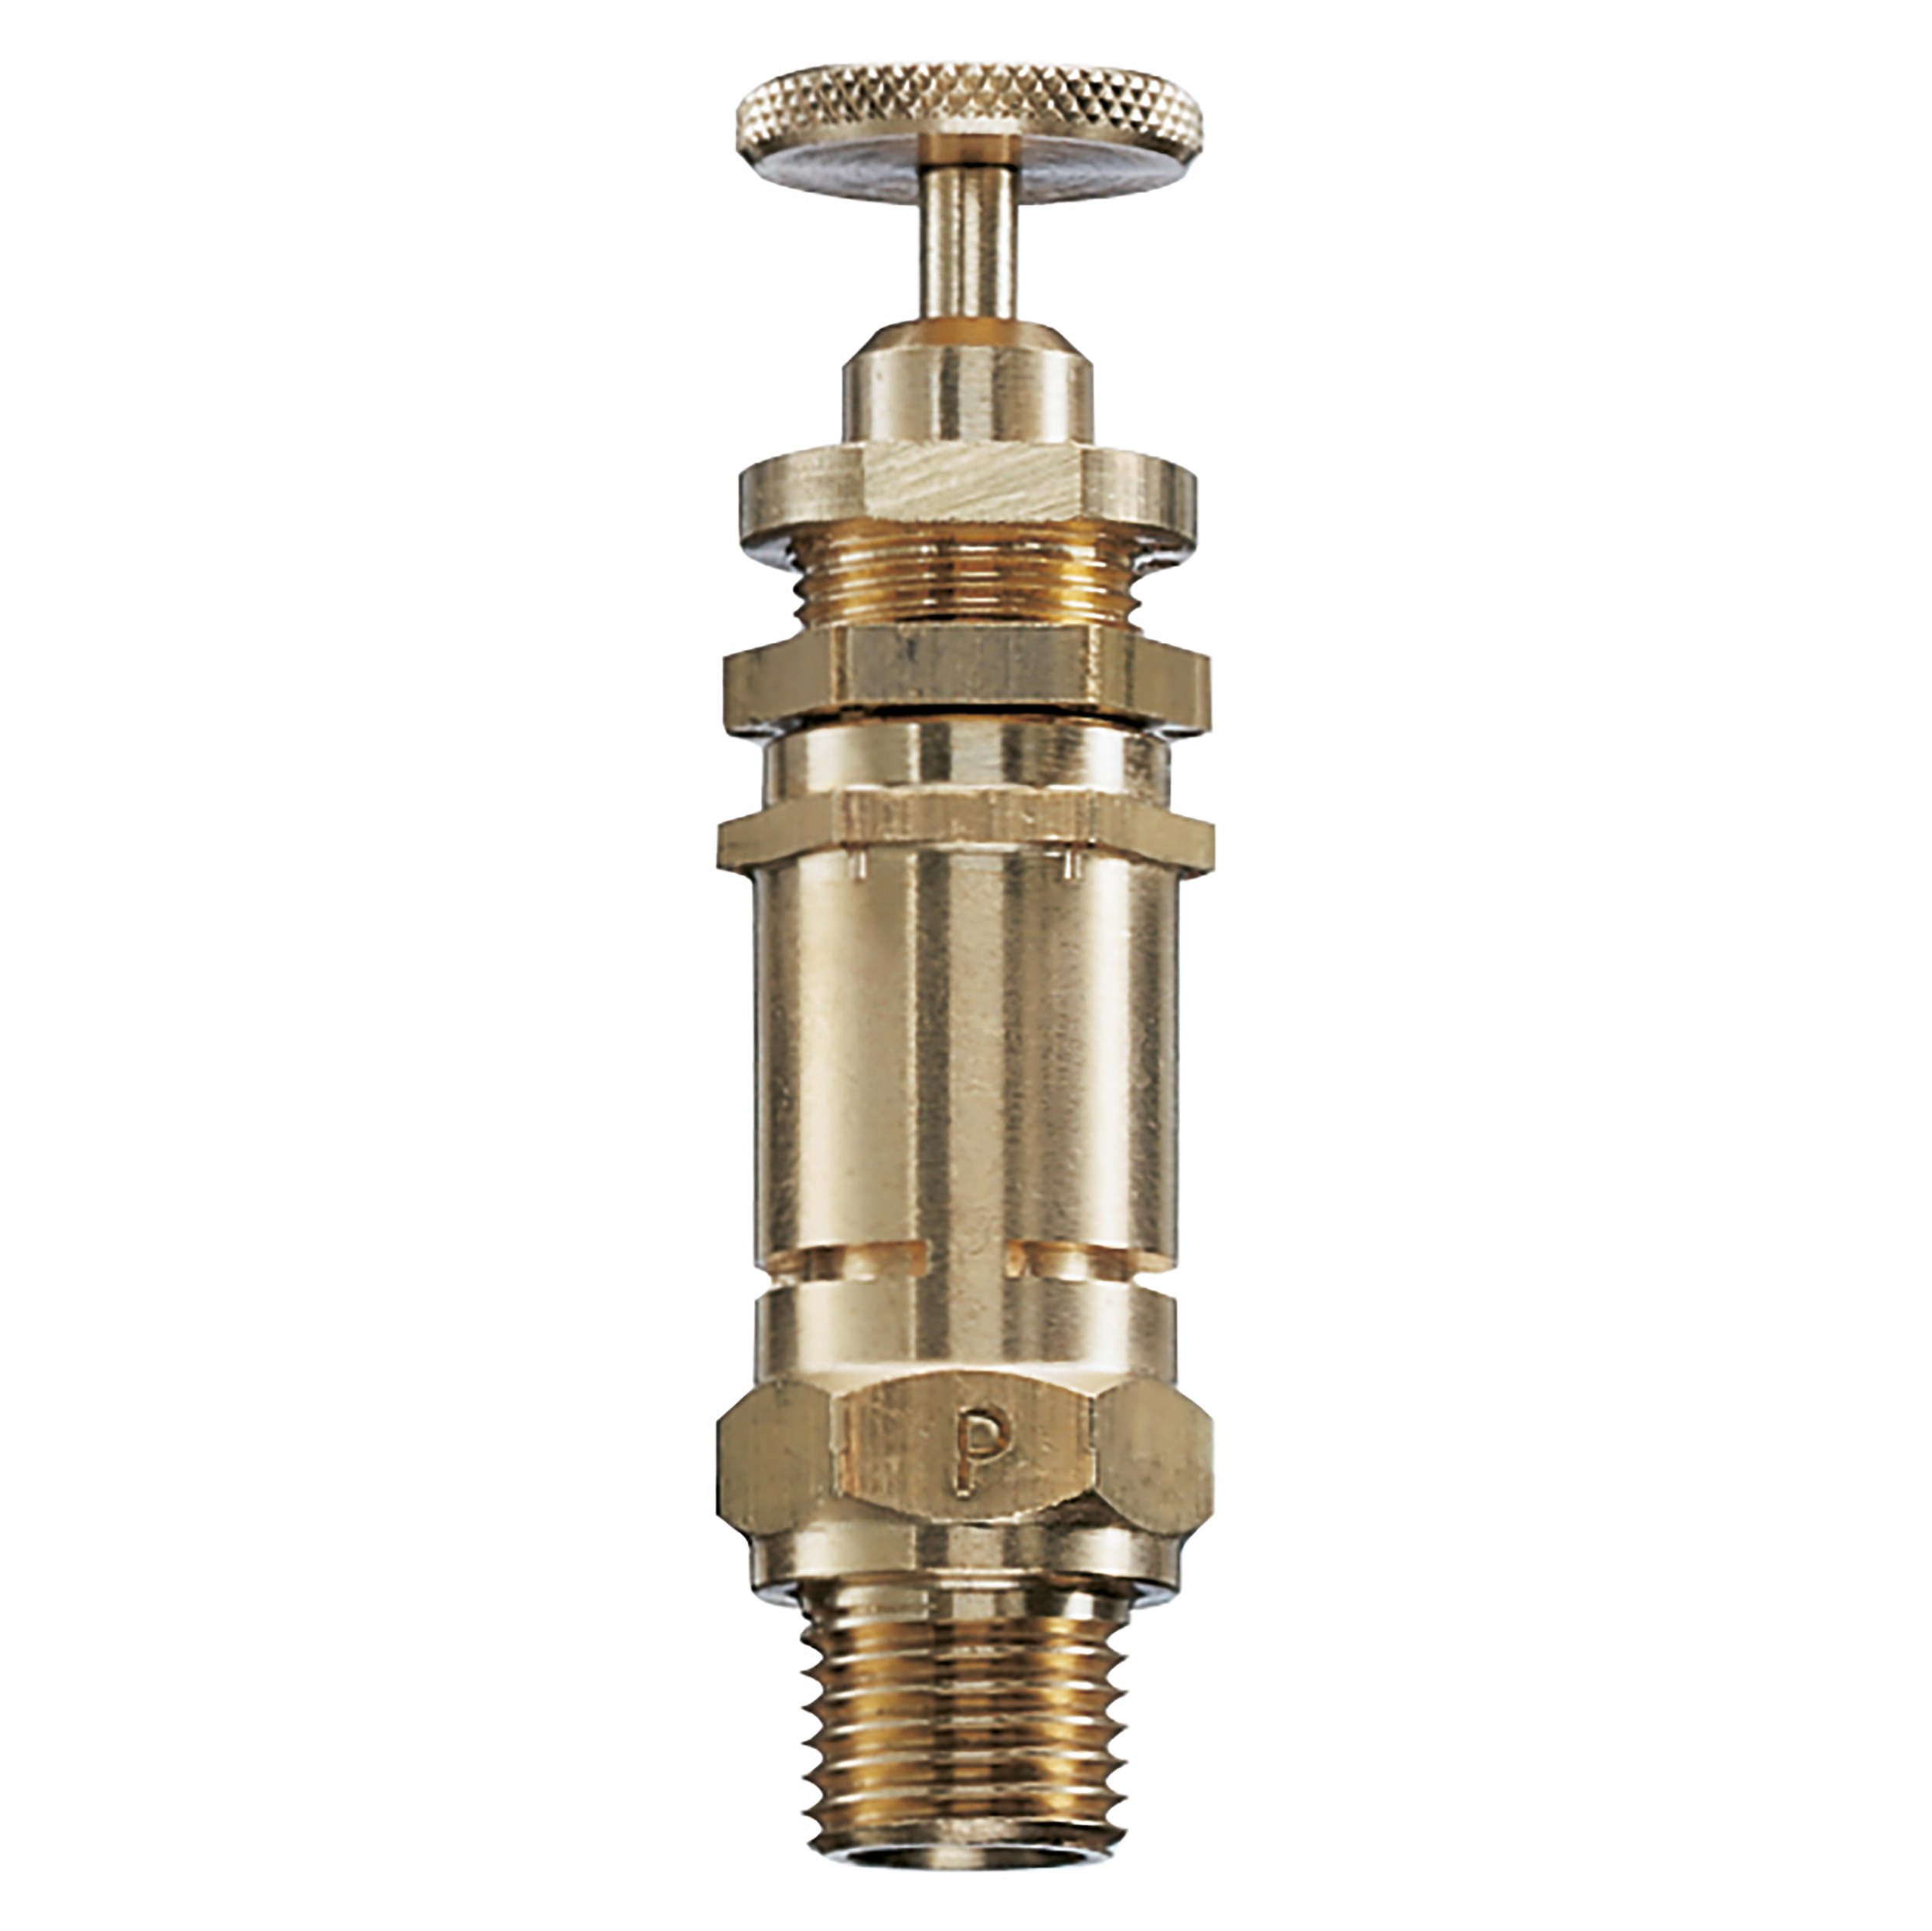 Blow-off valve DN 6, G ¼, set pressure: 8.5 bar (123 psi), seal: NBR, not component tested